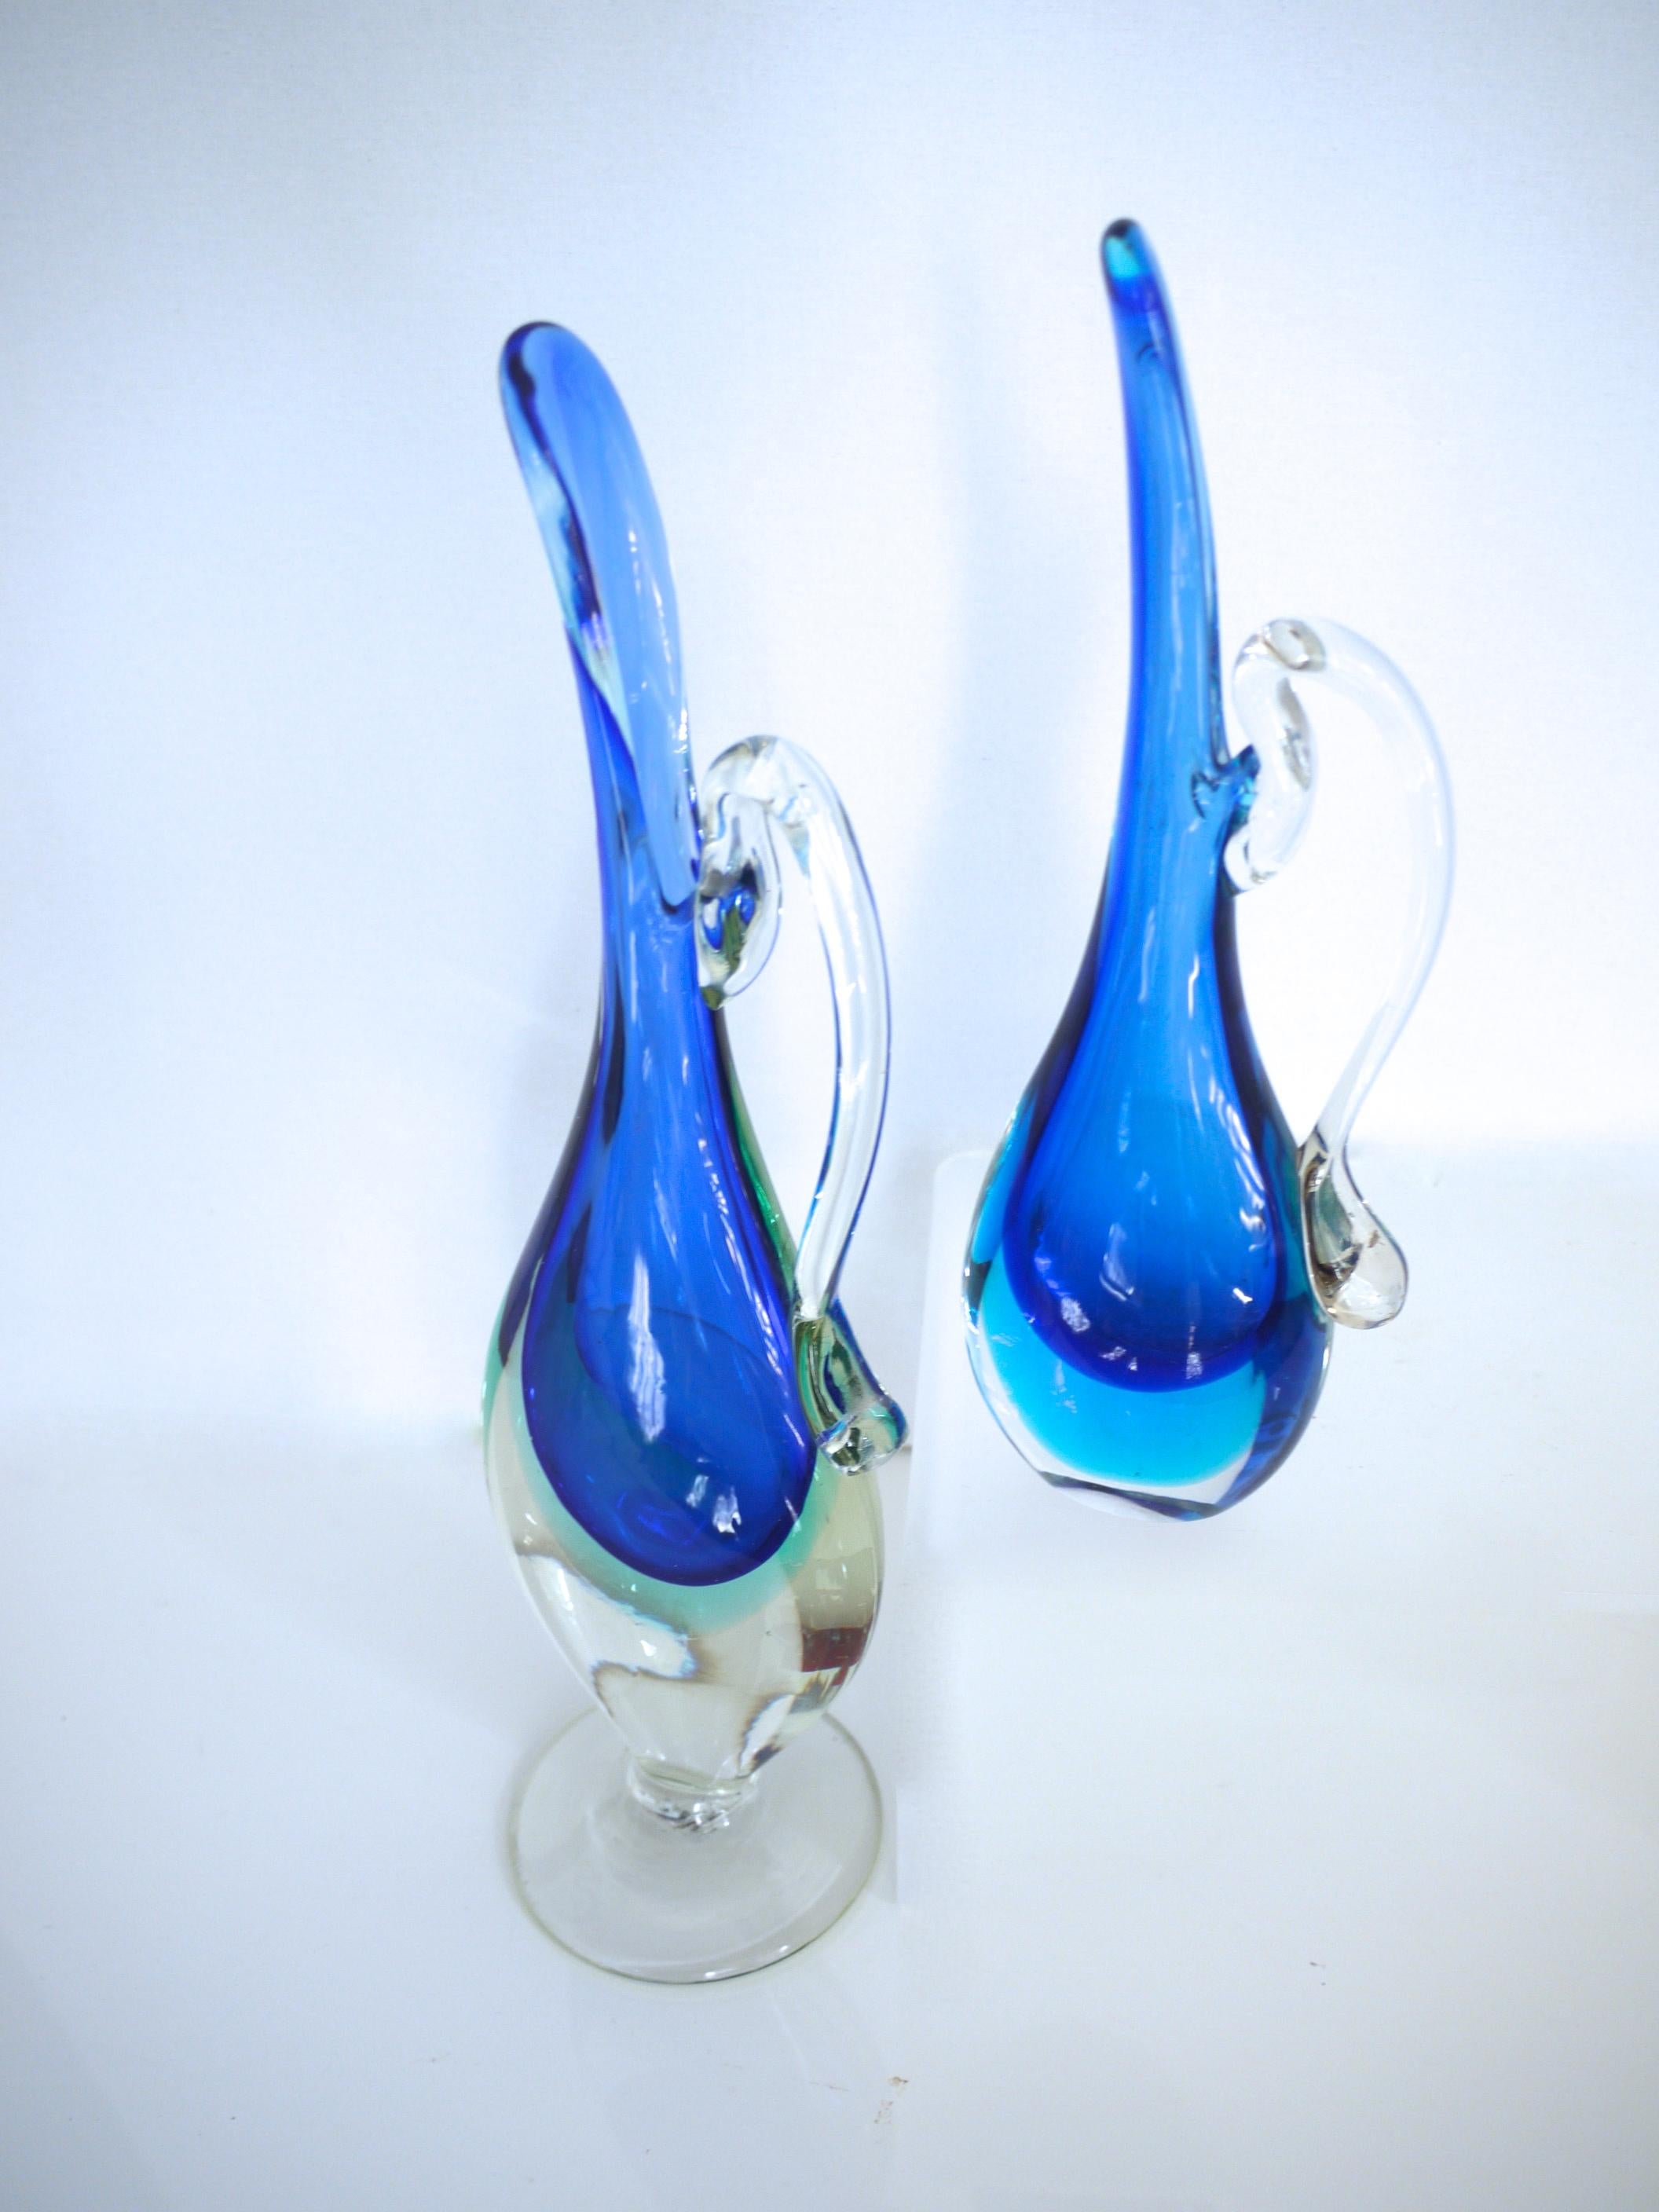 Pair of Murano Sommerso glass vases/pitcher in layered shades of blue.

Large Pitcher
Height 32 cms Depth 4.5 cms Width 10 cms
Weight 0.876 kgs

Small pitcher
Height 21 cms, width 5 cms, width at widest 7 cms
Weight 0.454 kgs.